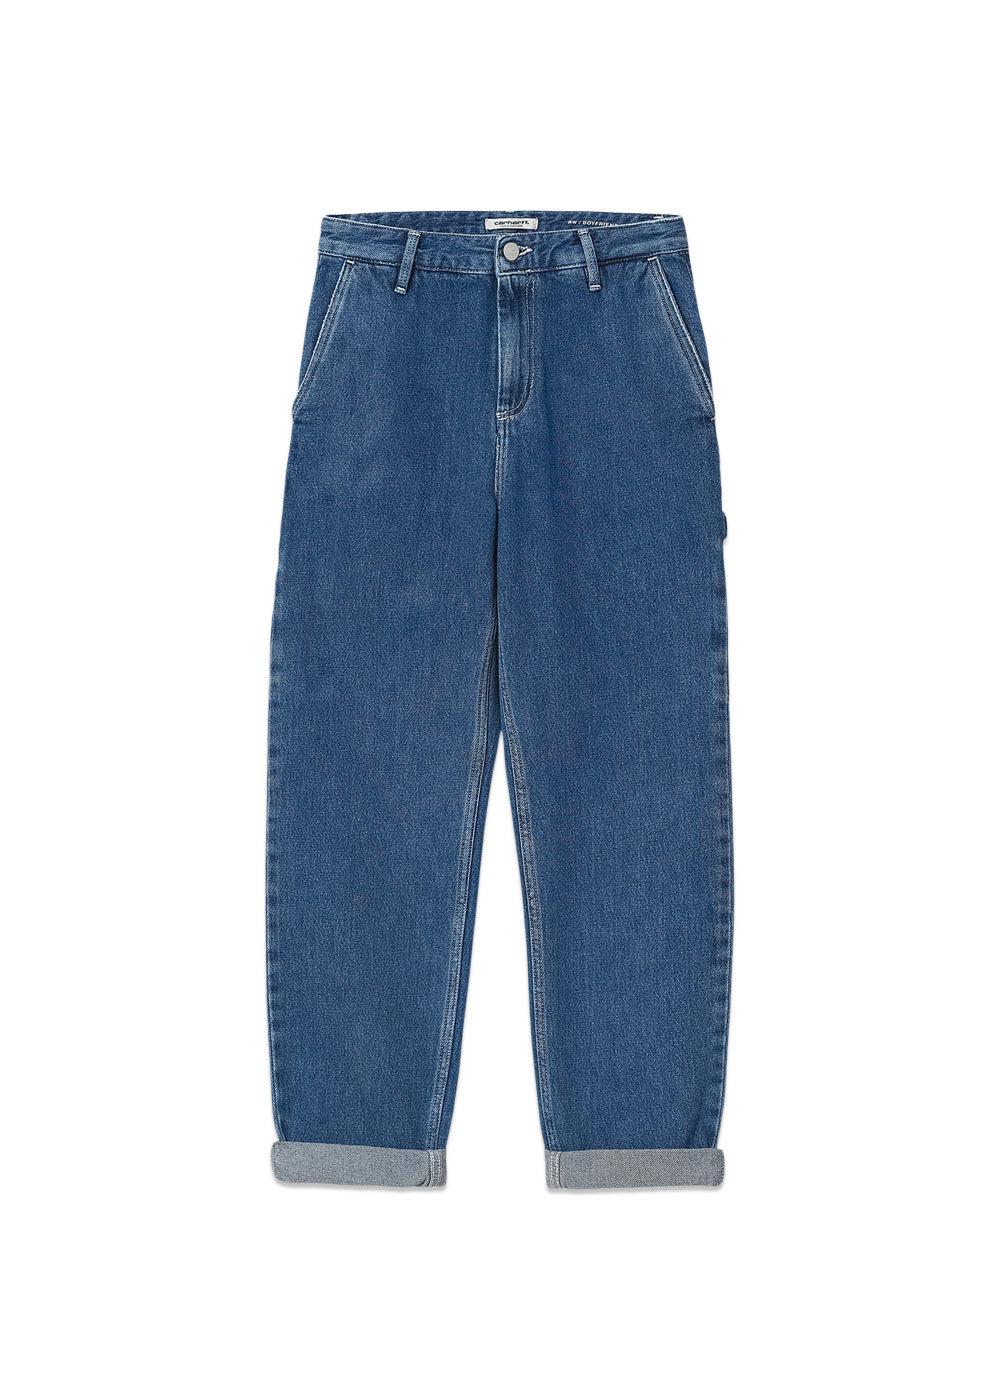 Carhartt WIP's W' pierce pant - Cotton Blue Stone Washed. Køb jeans her.